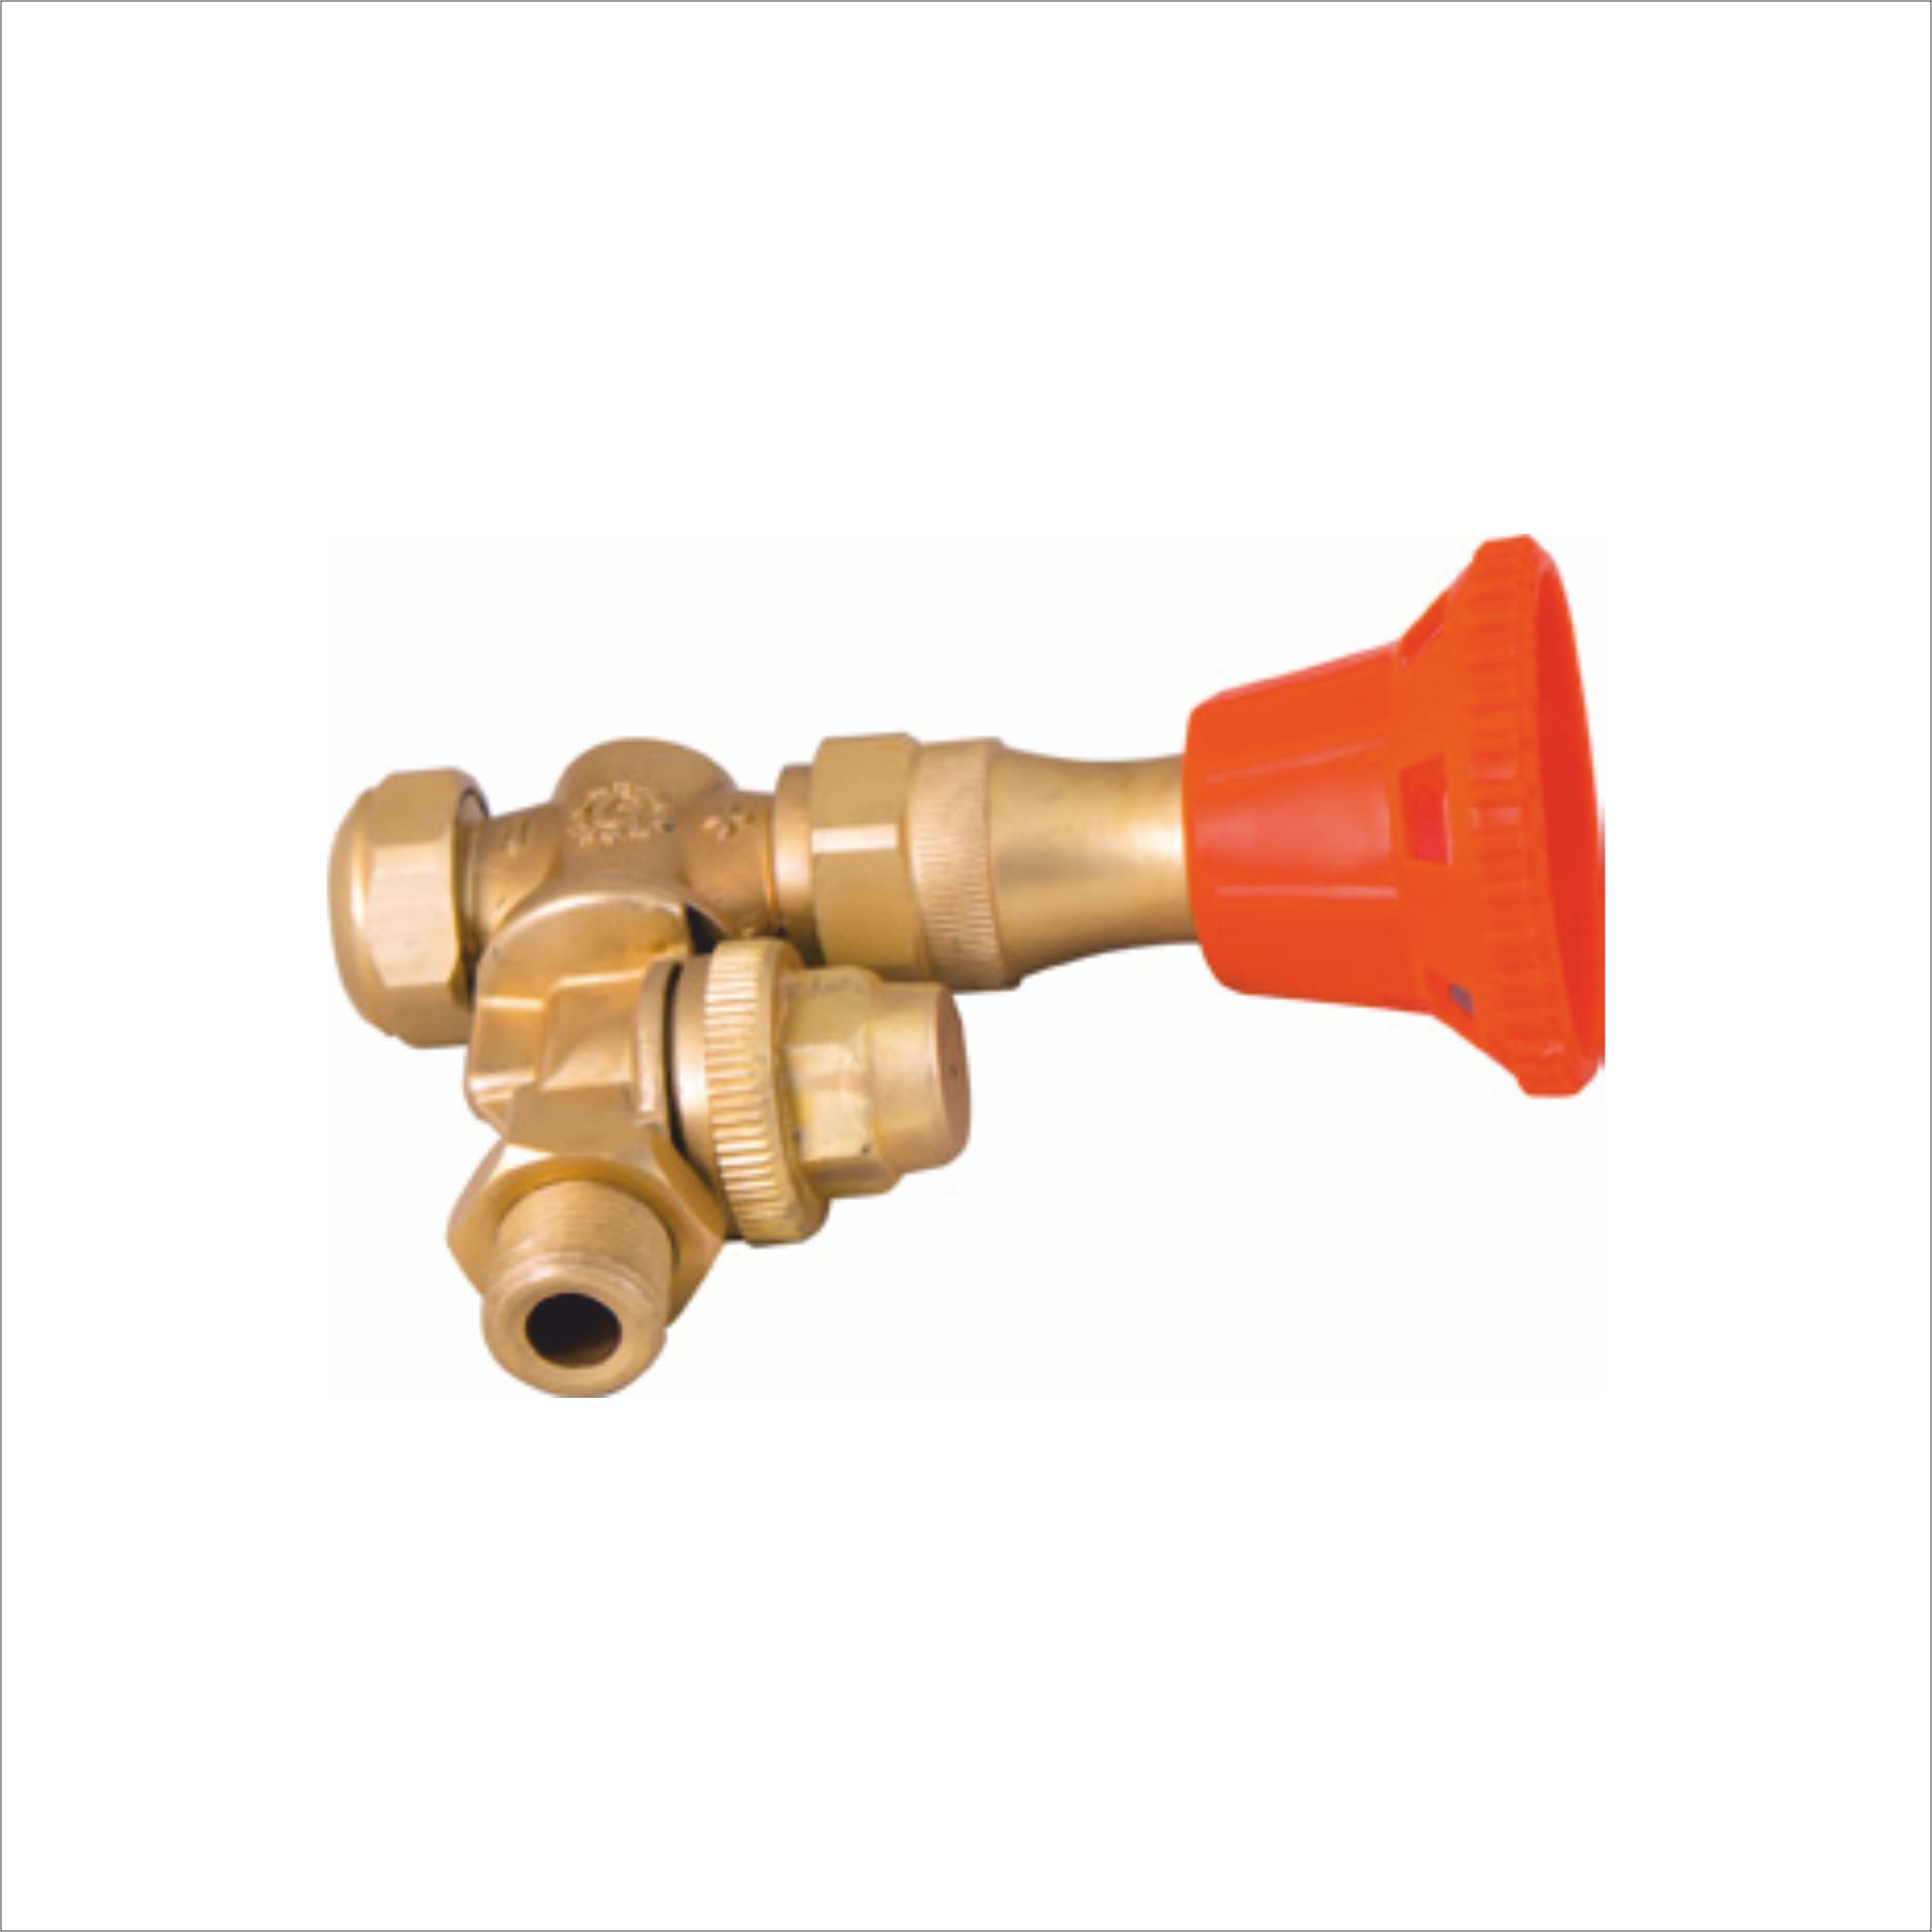 ADJUSTABLE BRASS NOZZLE FOR MISTBLOWER (WITH DIAPHRAGM CHECK VALVE)